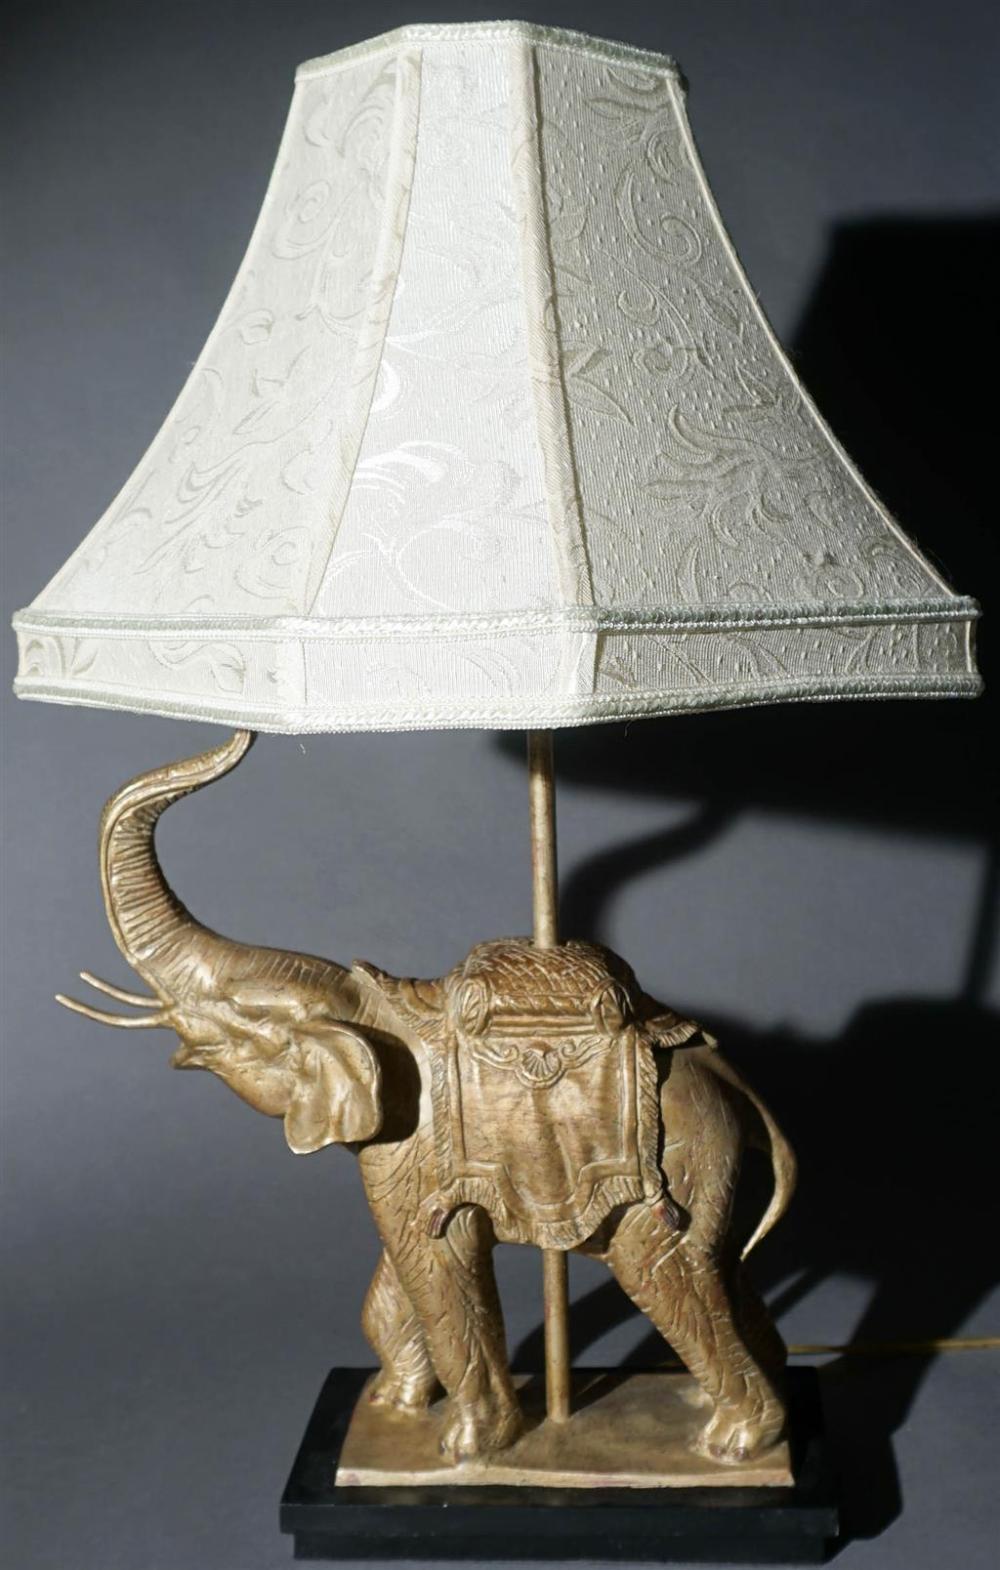 SILVER GOLD PAINTED ELEPHANT TABLE 329699